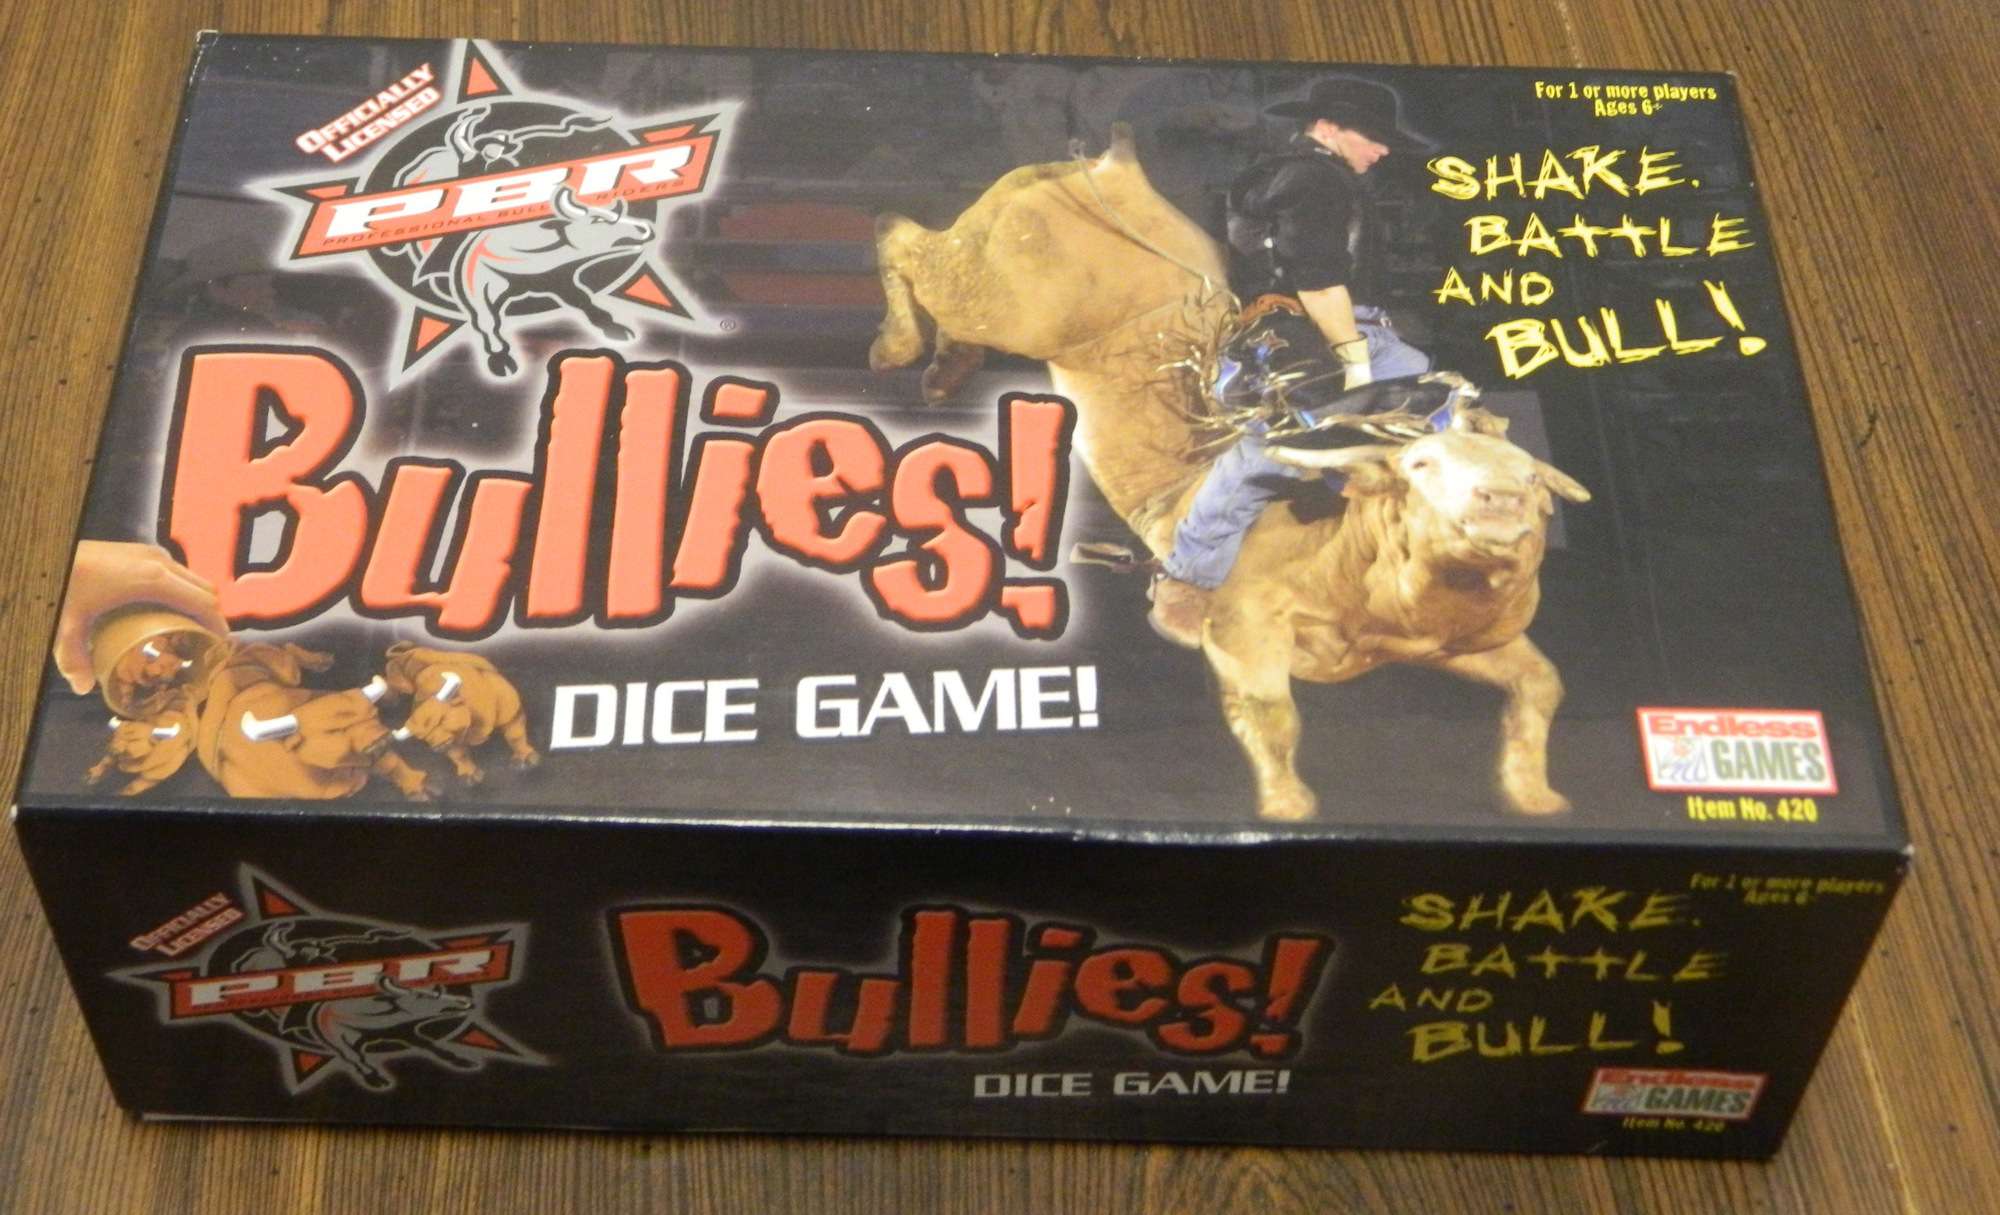 PBR Bullies! Dice Game Review